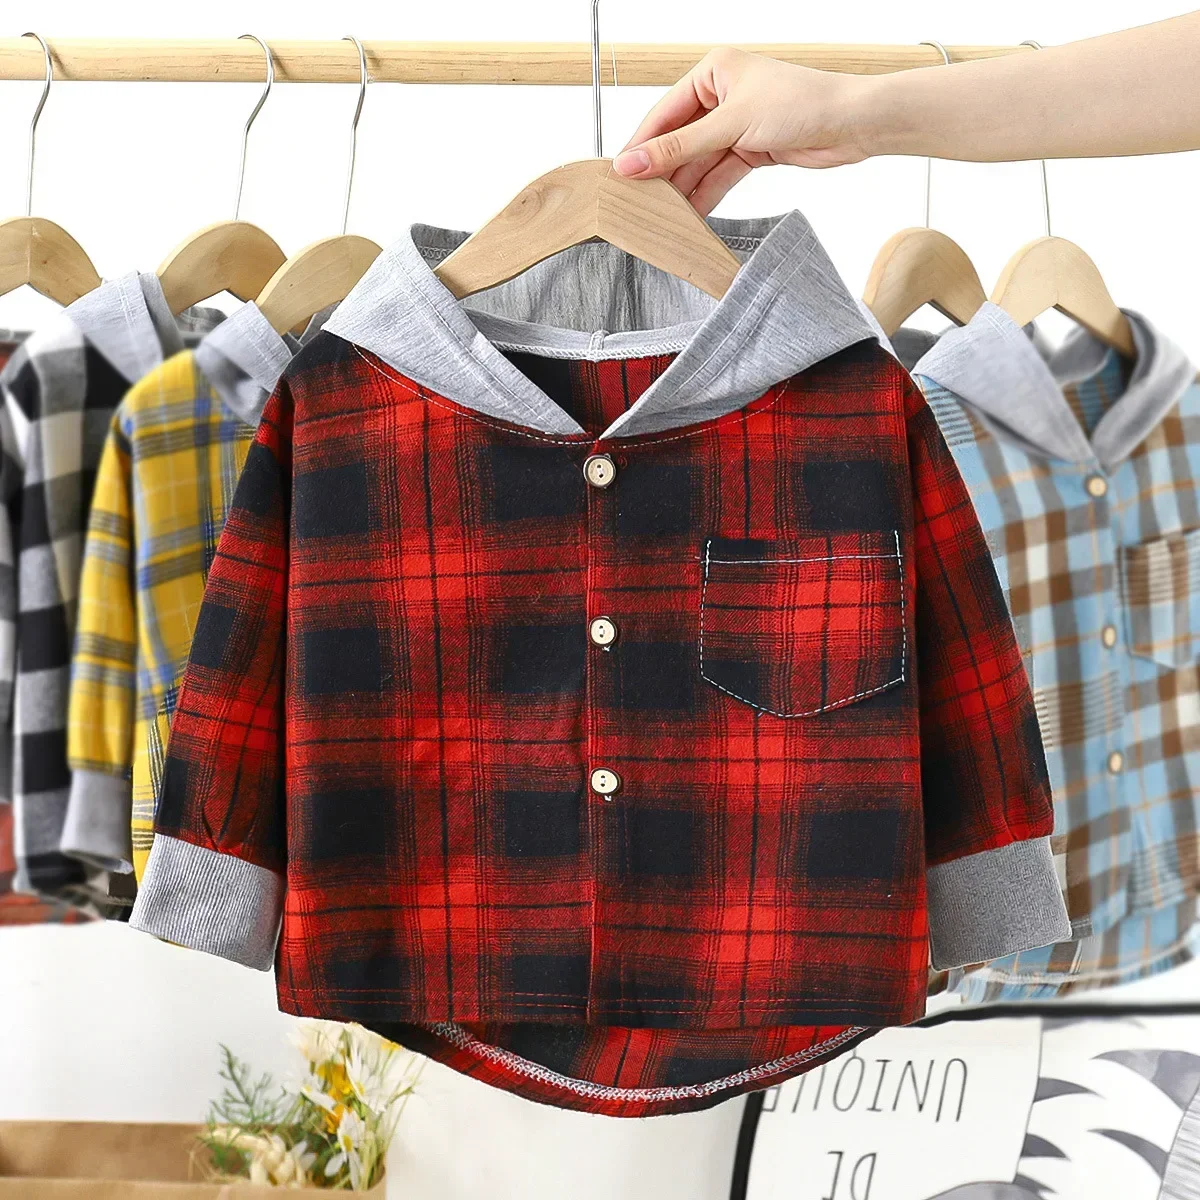 Children's Hooded Shirts Kids Clothes Baby Boys Plaid Shirts Coat for Spring Autumn Girls Long-Sleeve Jacket Bottoming Clothing-animated-img